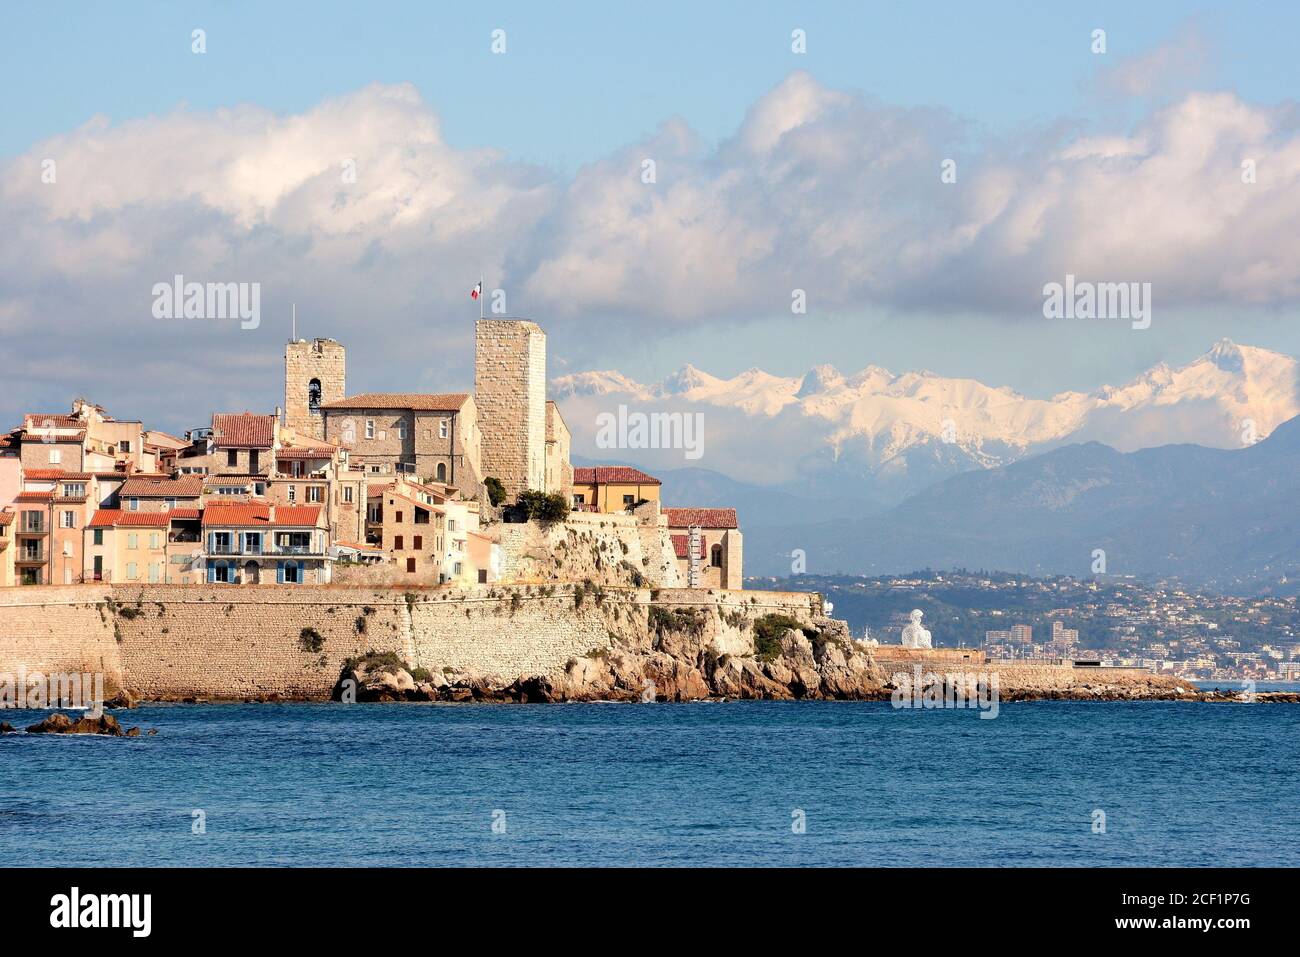 France, french riviera, Antibes, the old town with the ramparts, the Grimaldi castle, the cathedral, the snowy Mercantour massif and the mediterranean Stock Photo